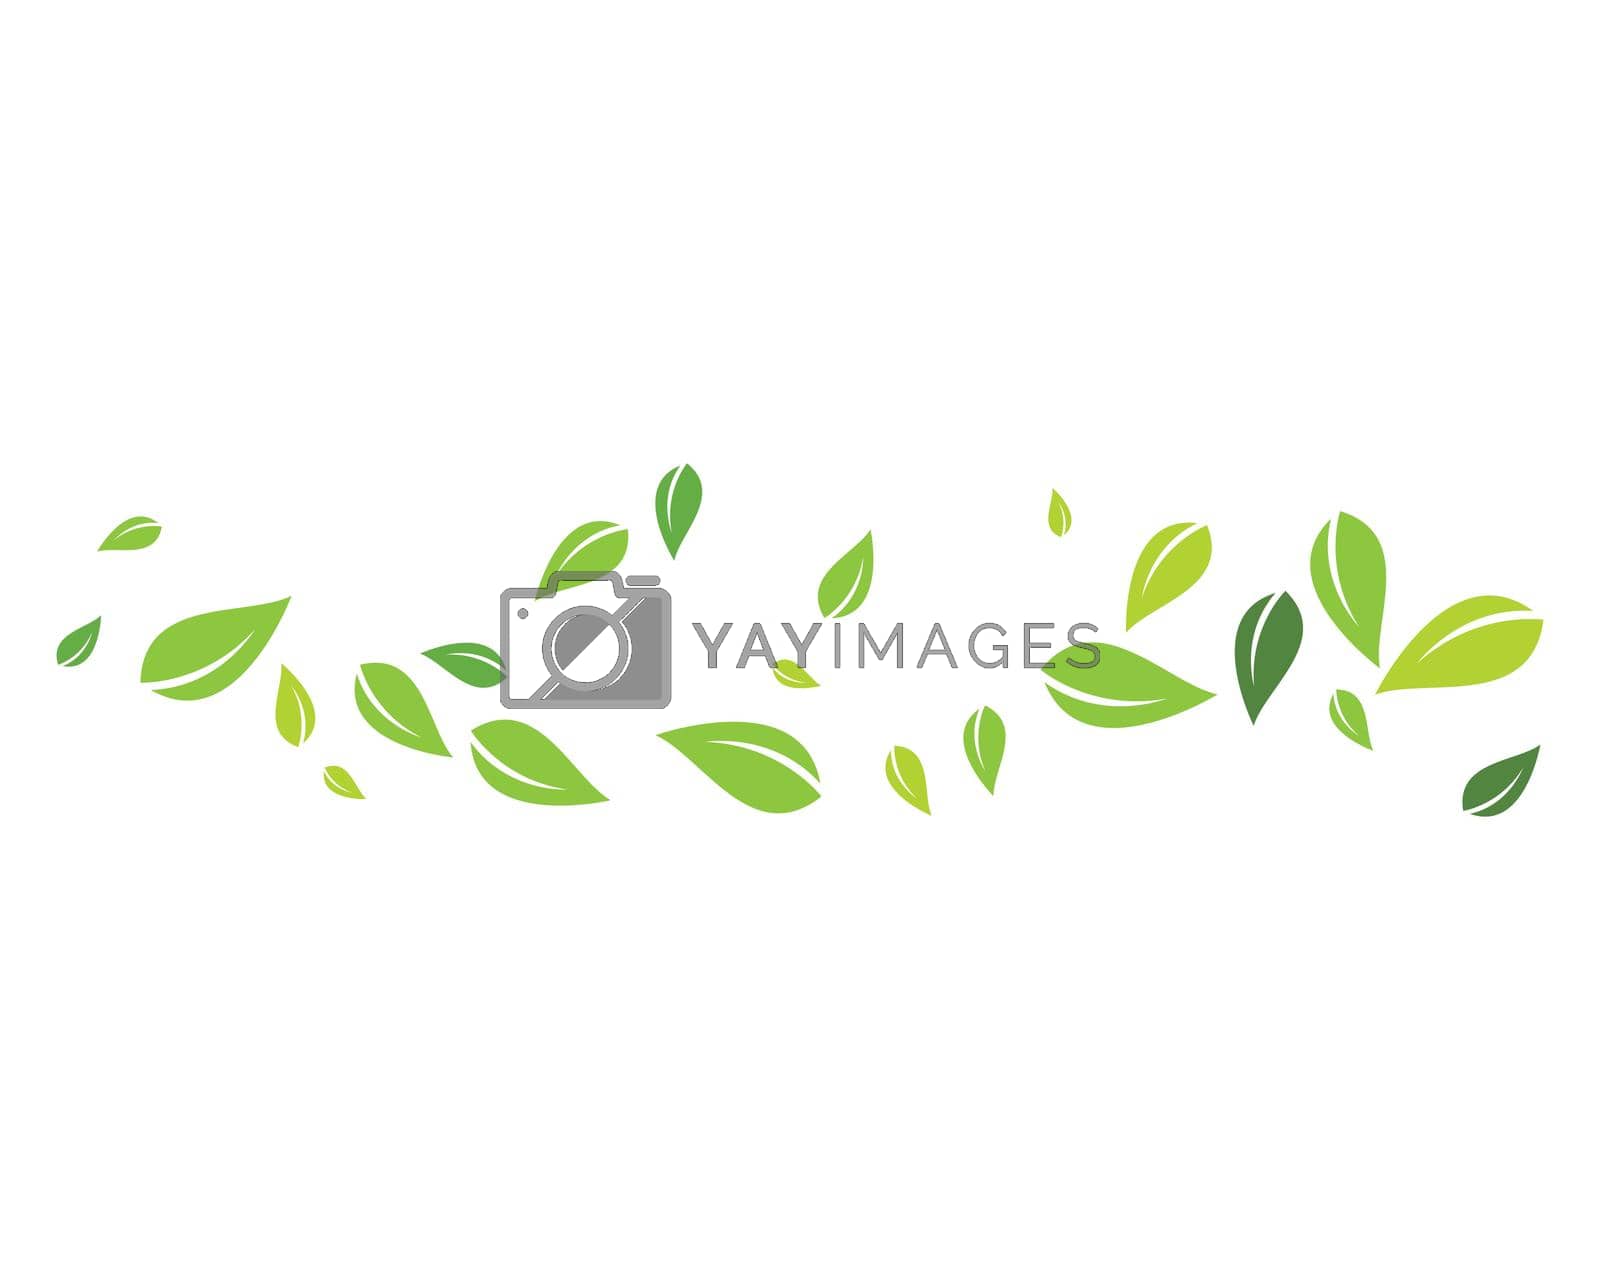 Royalty free image of green leaf background by awk